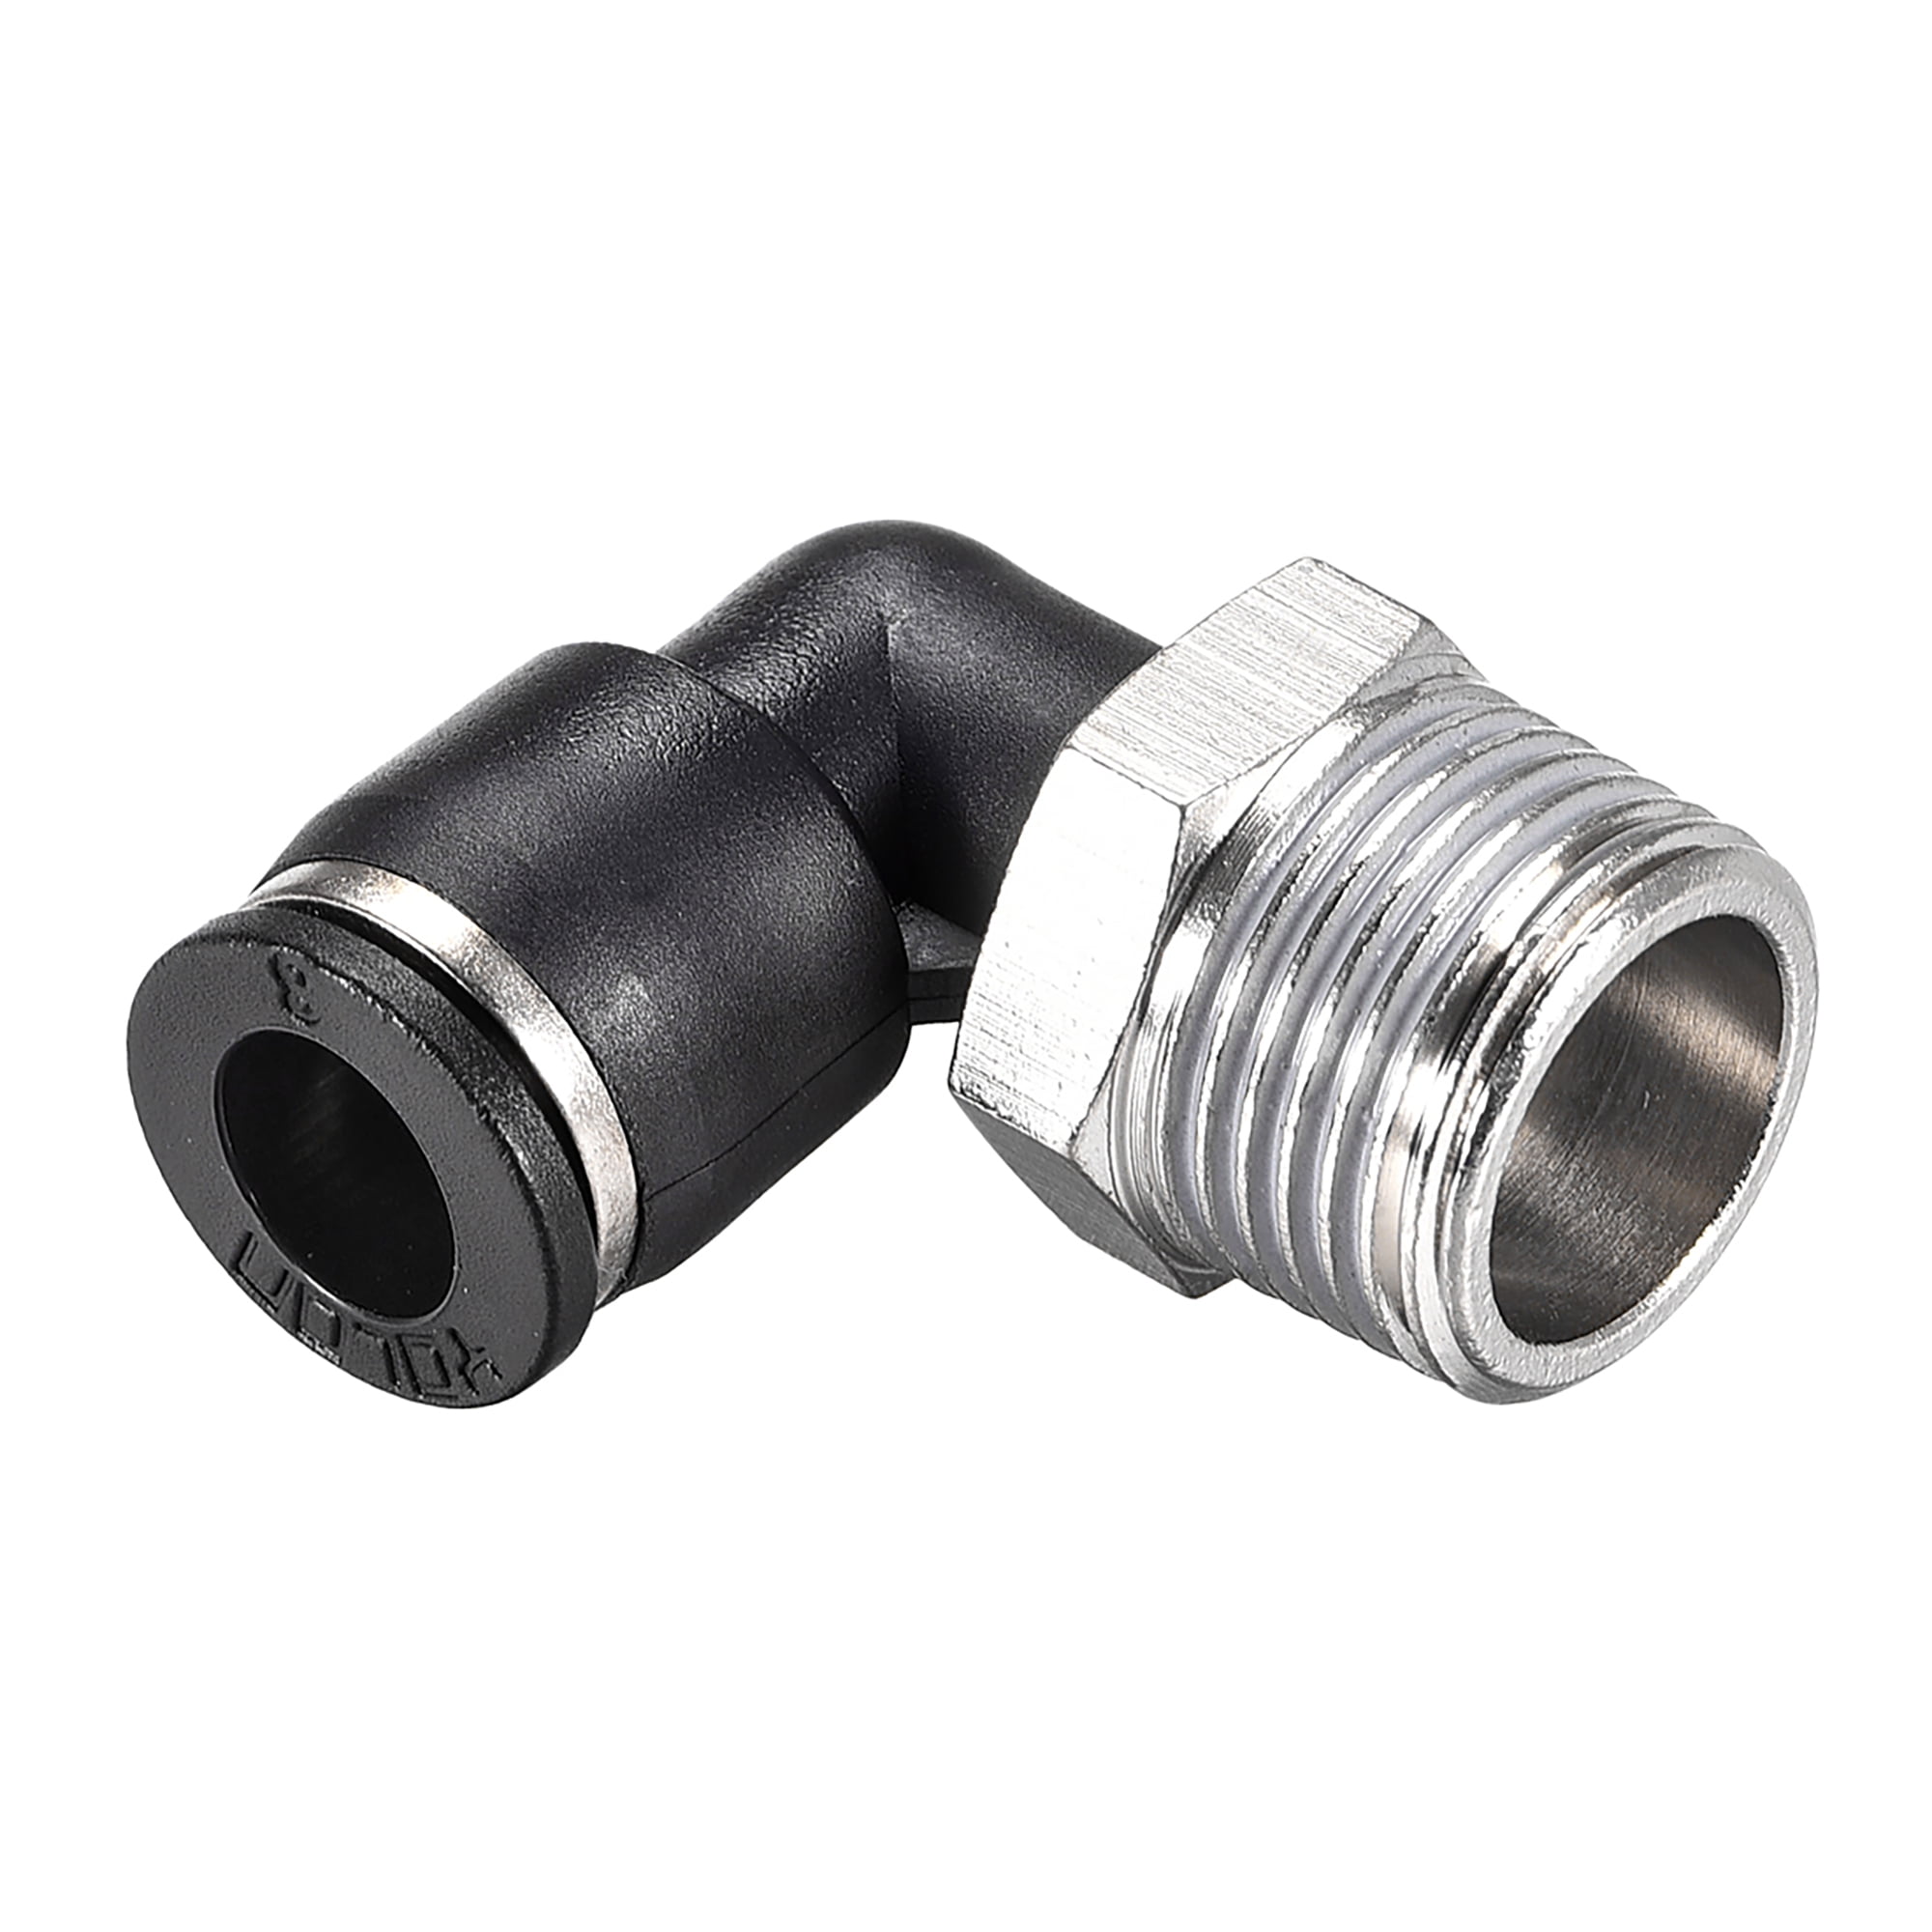 Air Water Pneumatic Compression Male Stud Tube Elbow 3/8" x 3/8"npt 